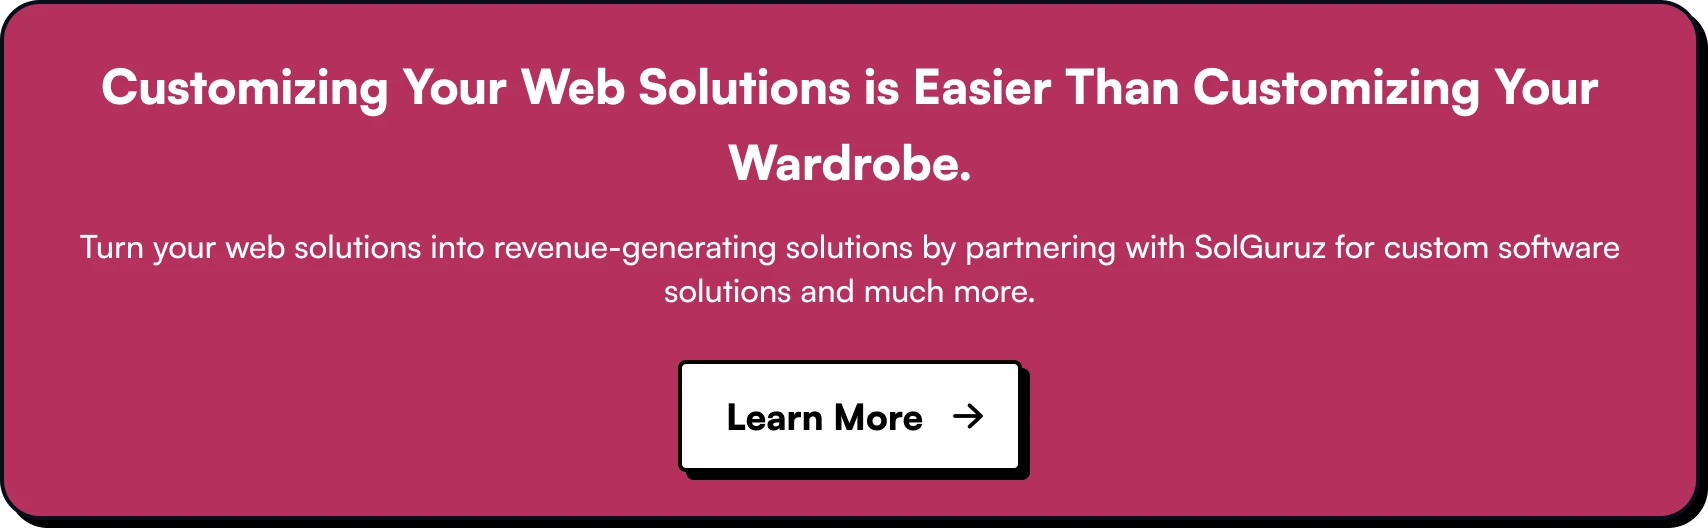 Customizing Your Web Solutions is Easier Than Customizing Your Wardrobe